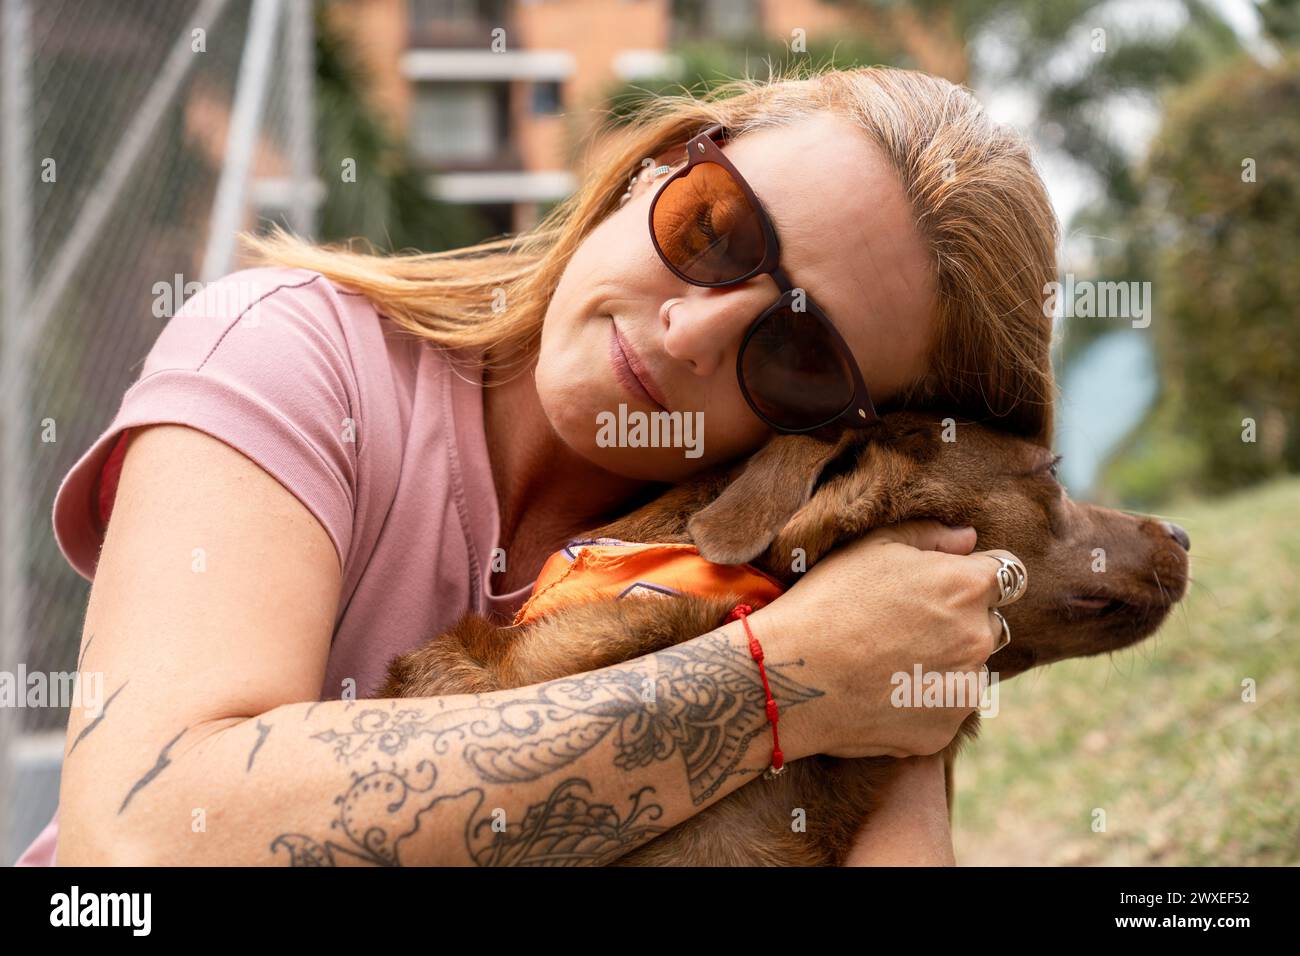 Close-up of a woman with closed eyes and sunglasses hugging her dog affectionately. Stock Photo